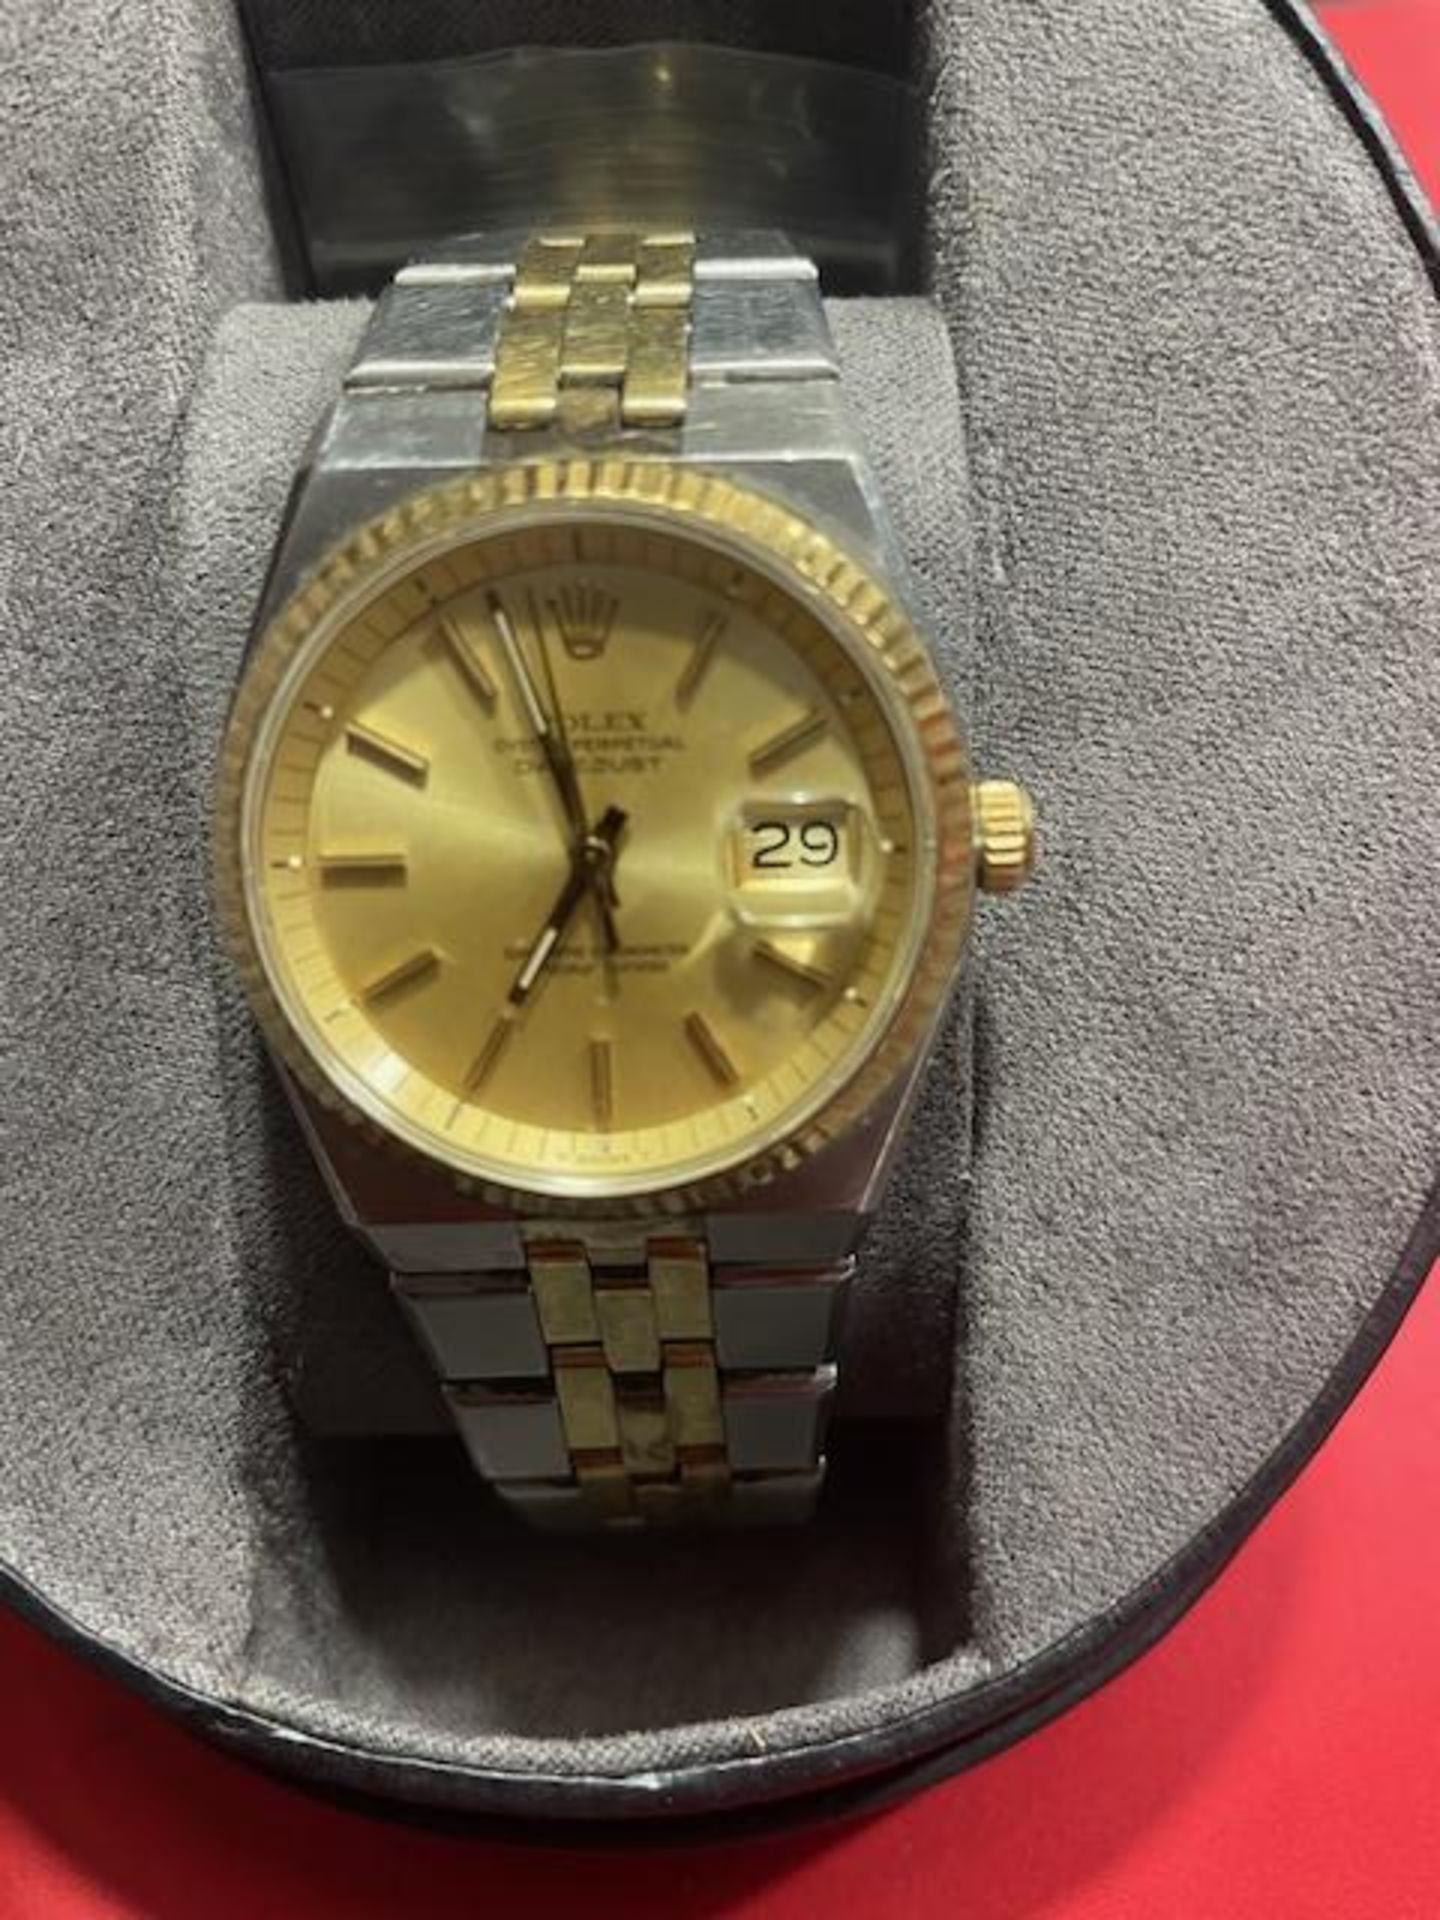 Rolex Oyster Purpetual DATEJUST Mens Watch - Image 3 of 15